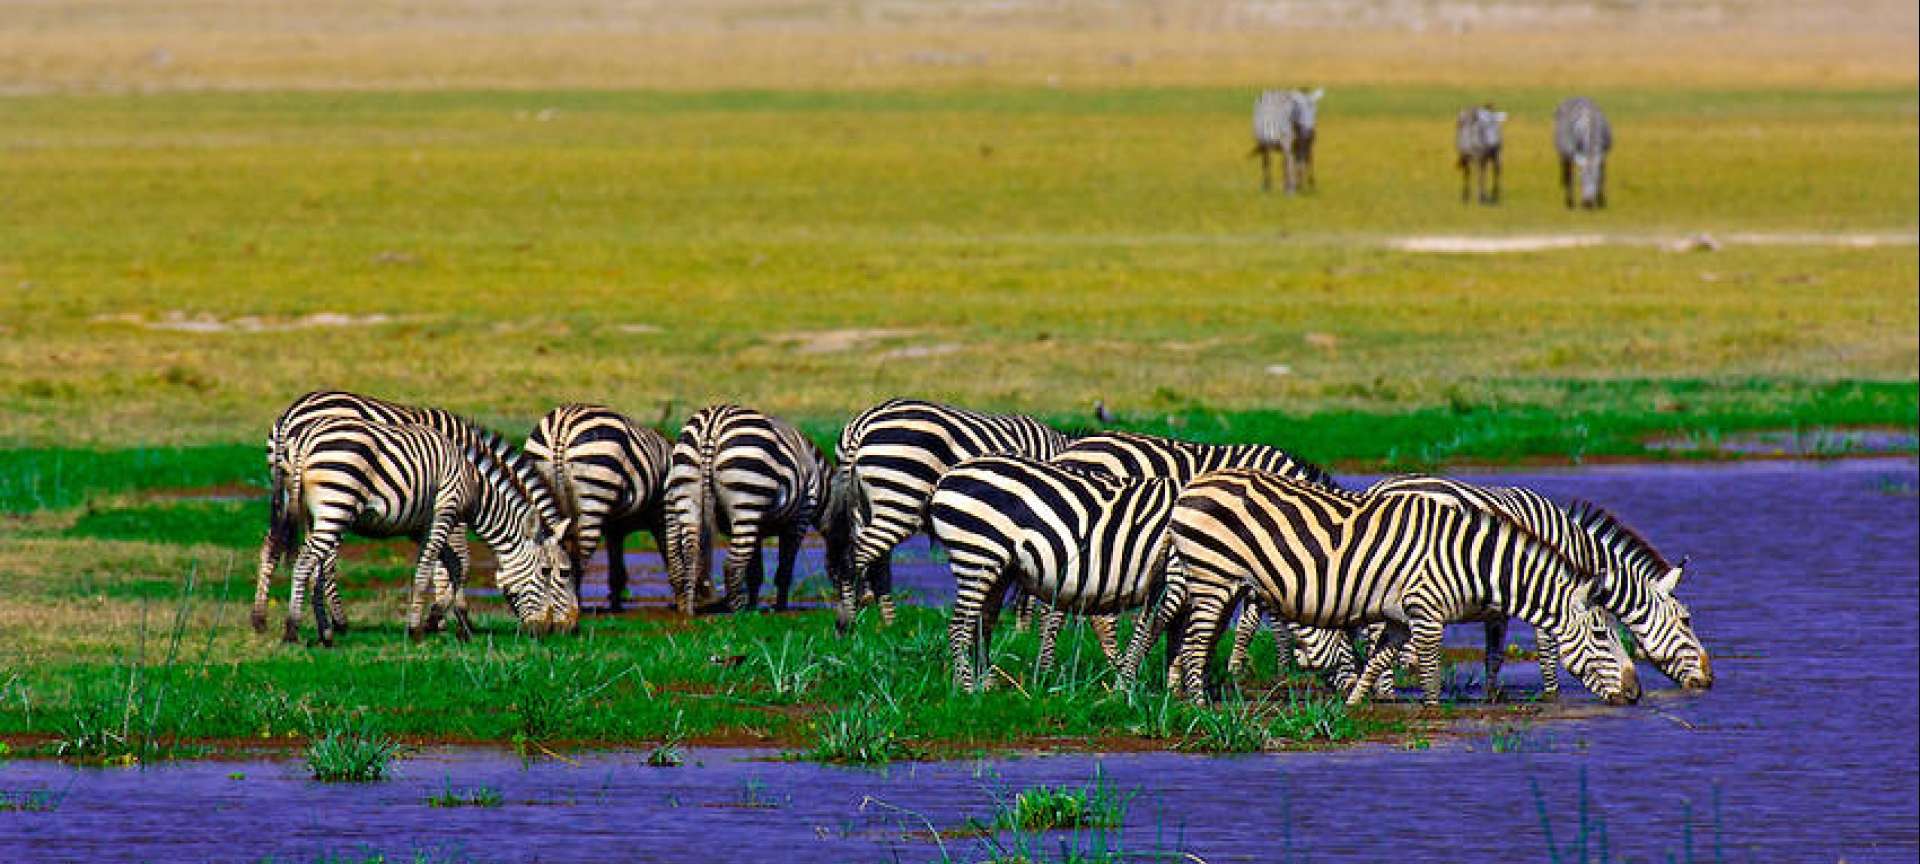 Zebra always photograph so well against the backdrop of the African savannah